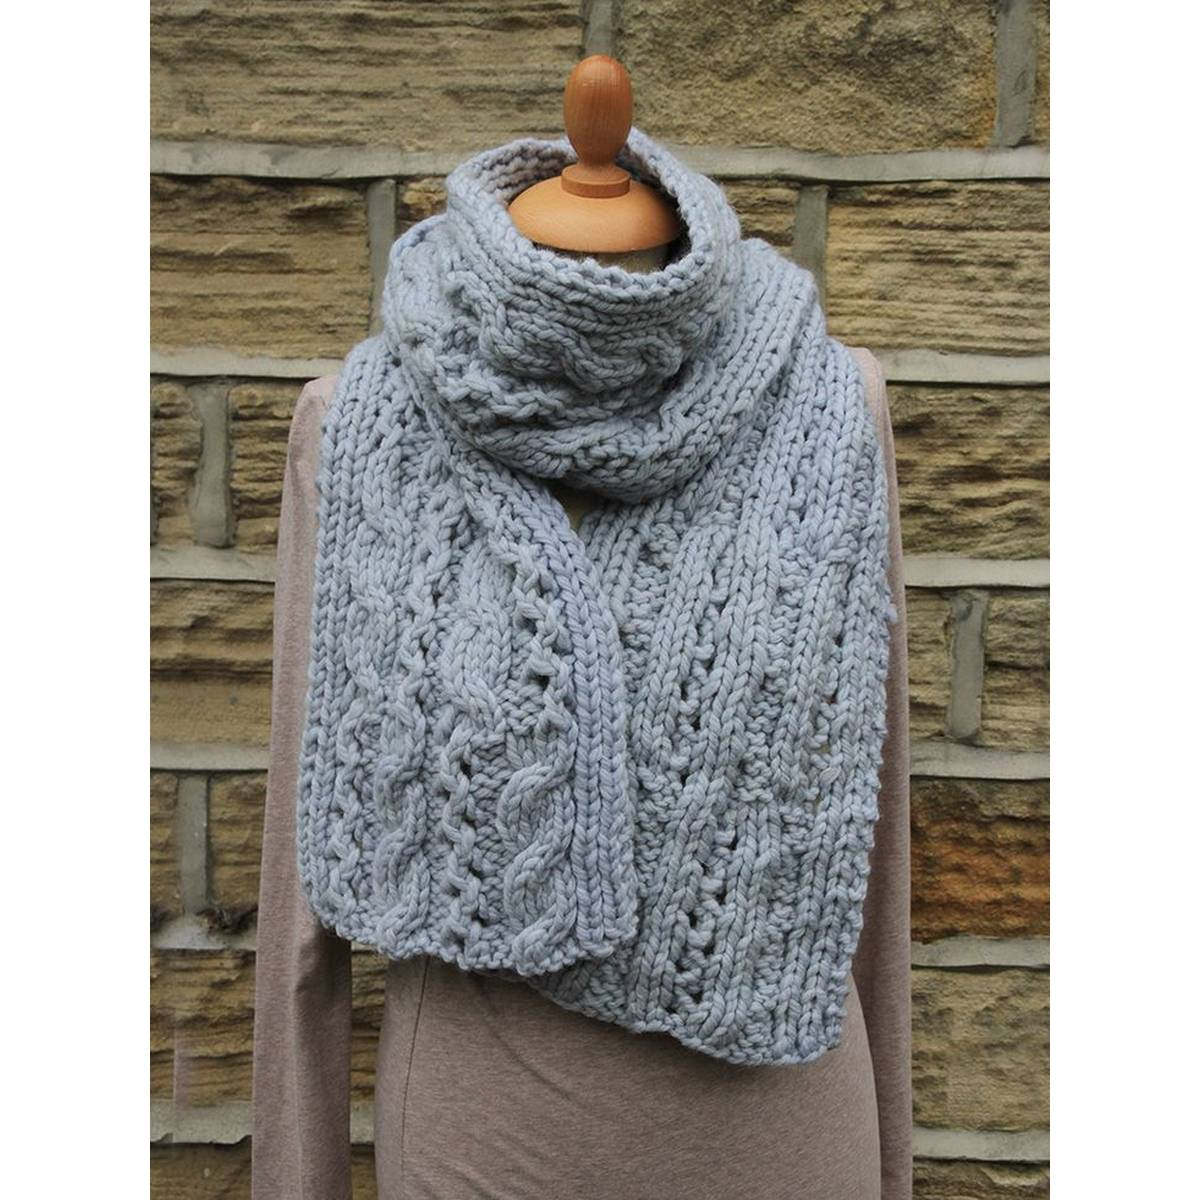 Cable Knitted Scarf Pattern Rowan Lace Cable Scarf Digital Pattern